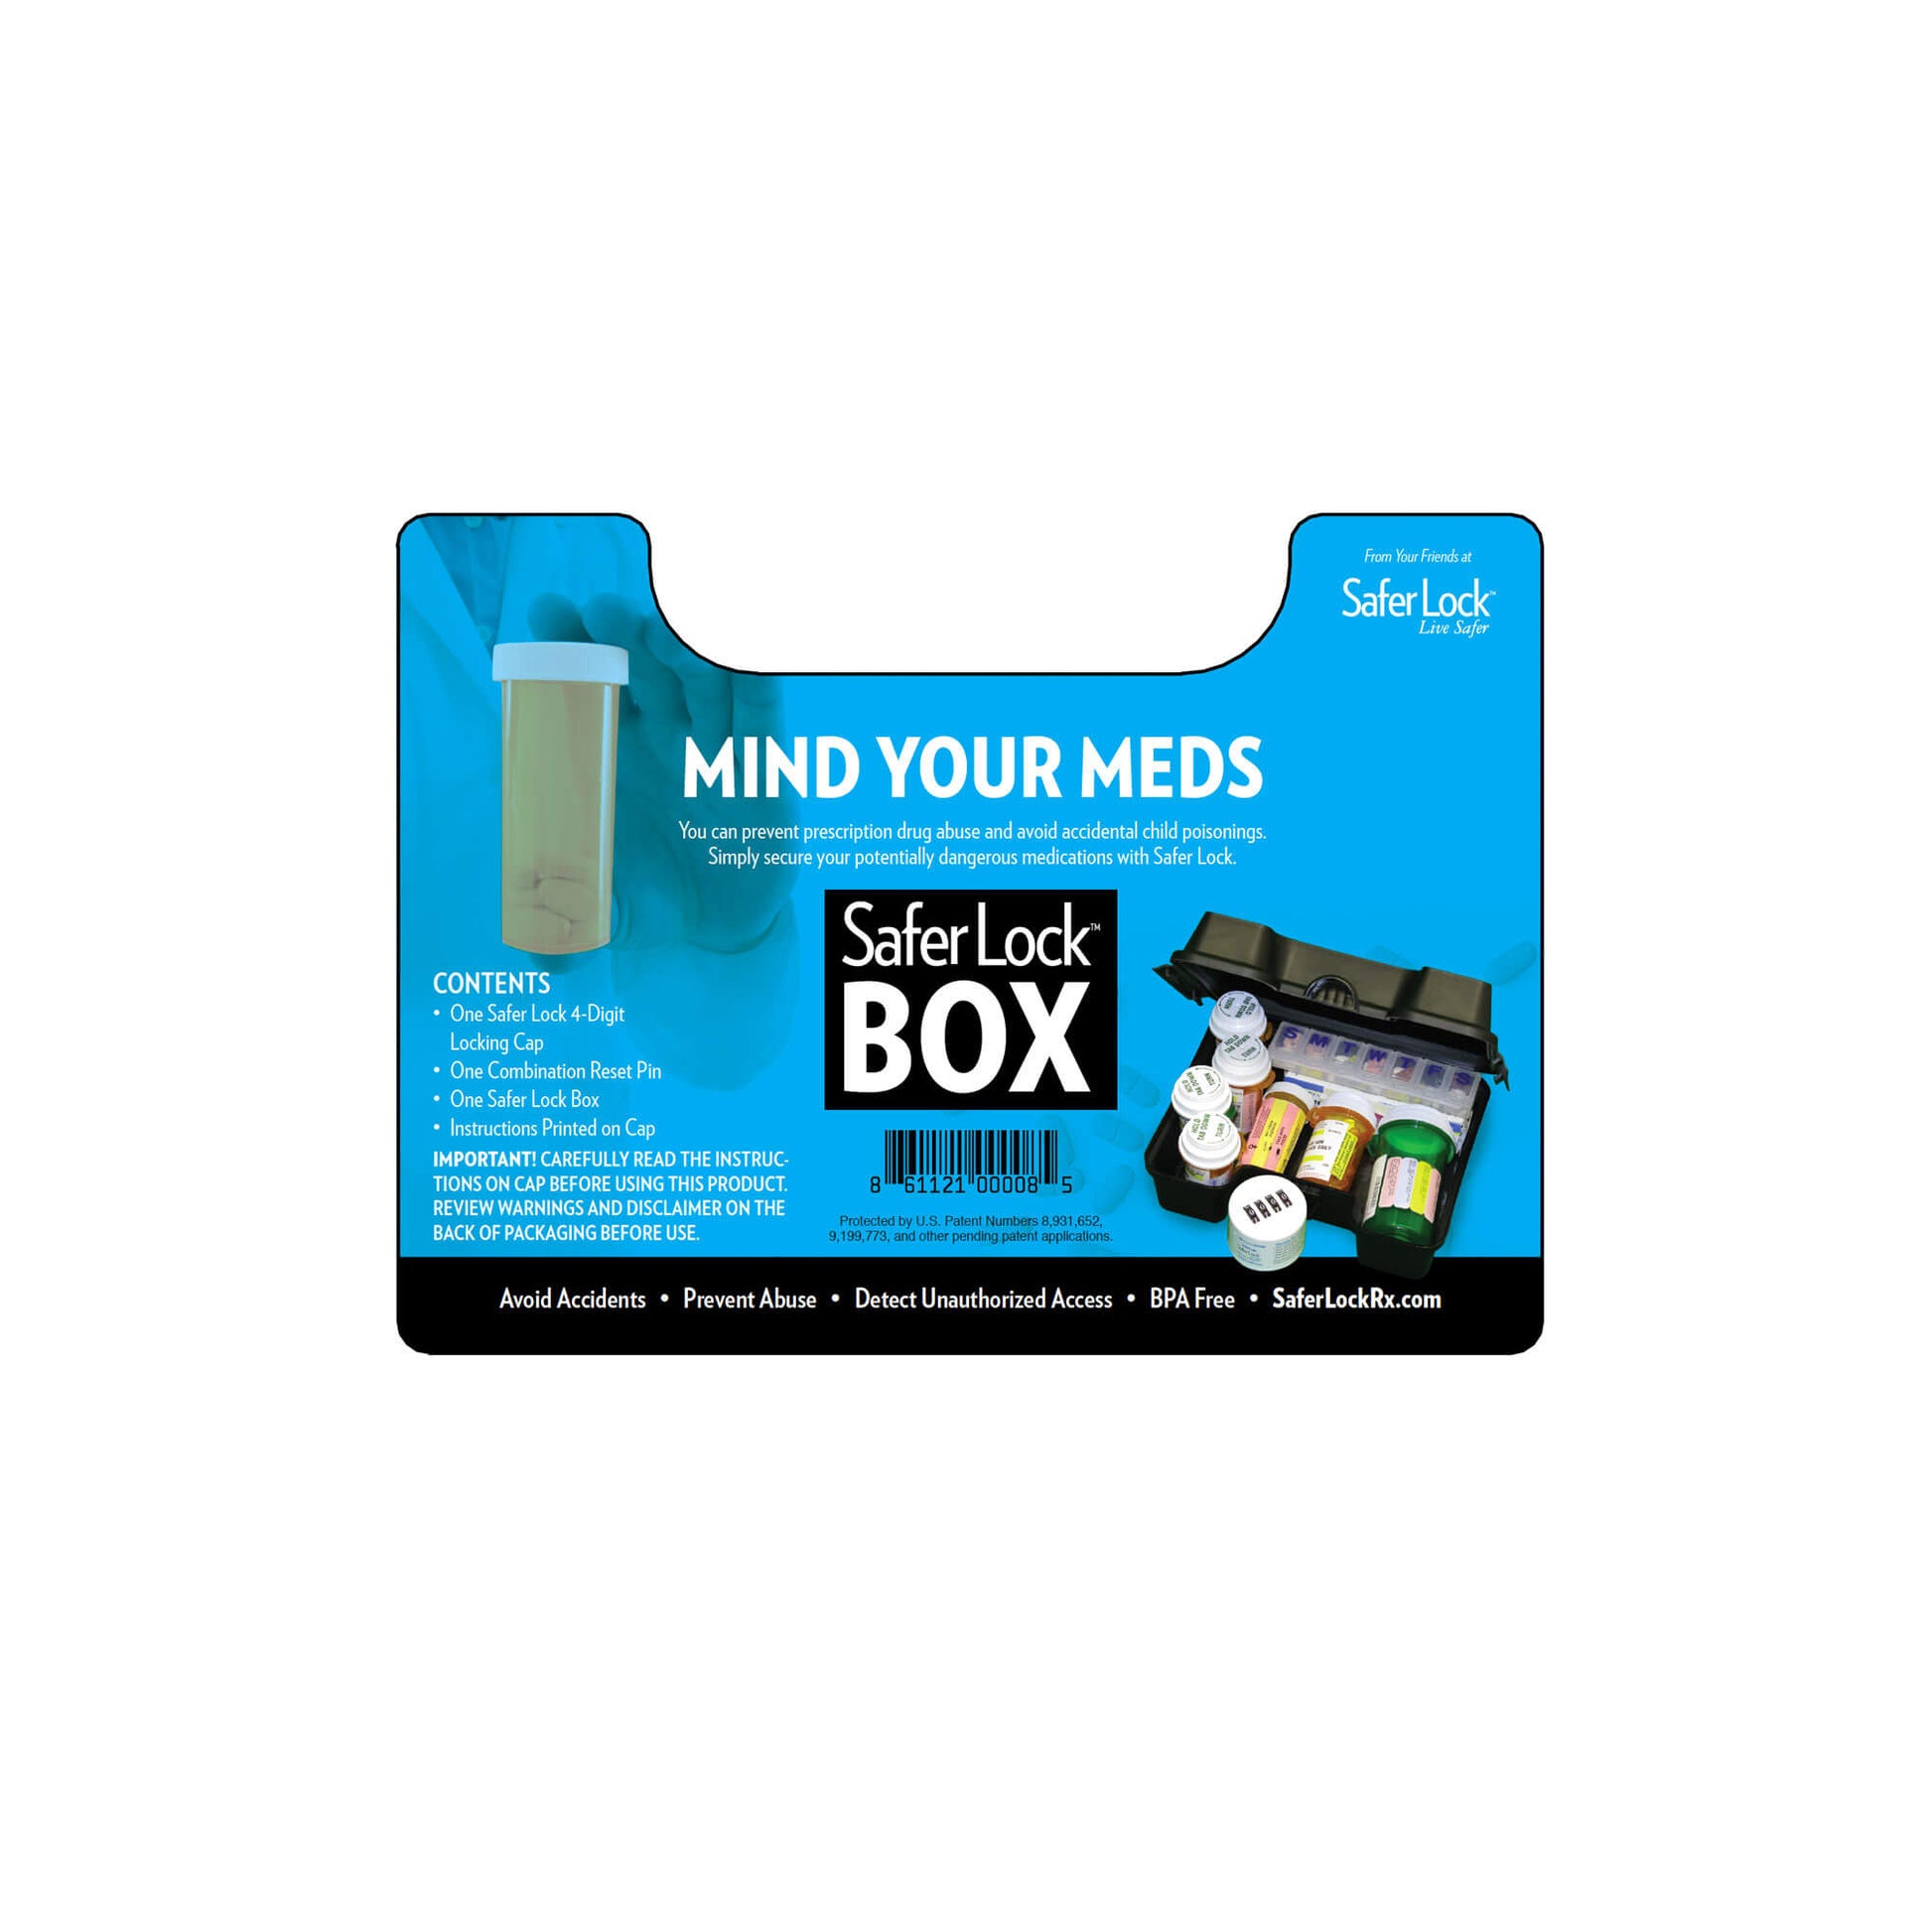 A graphic showing the design for the front of the Safer Lock box. It is teal with "Mind Your Meds" written on it, followed by product information.